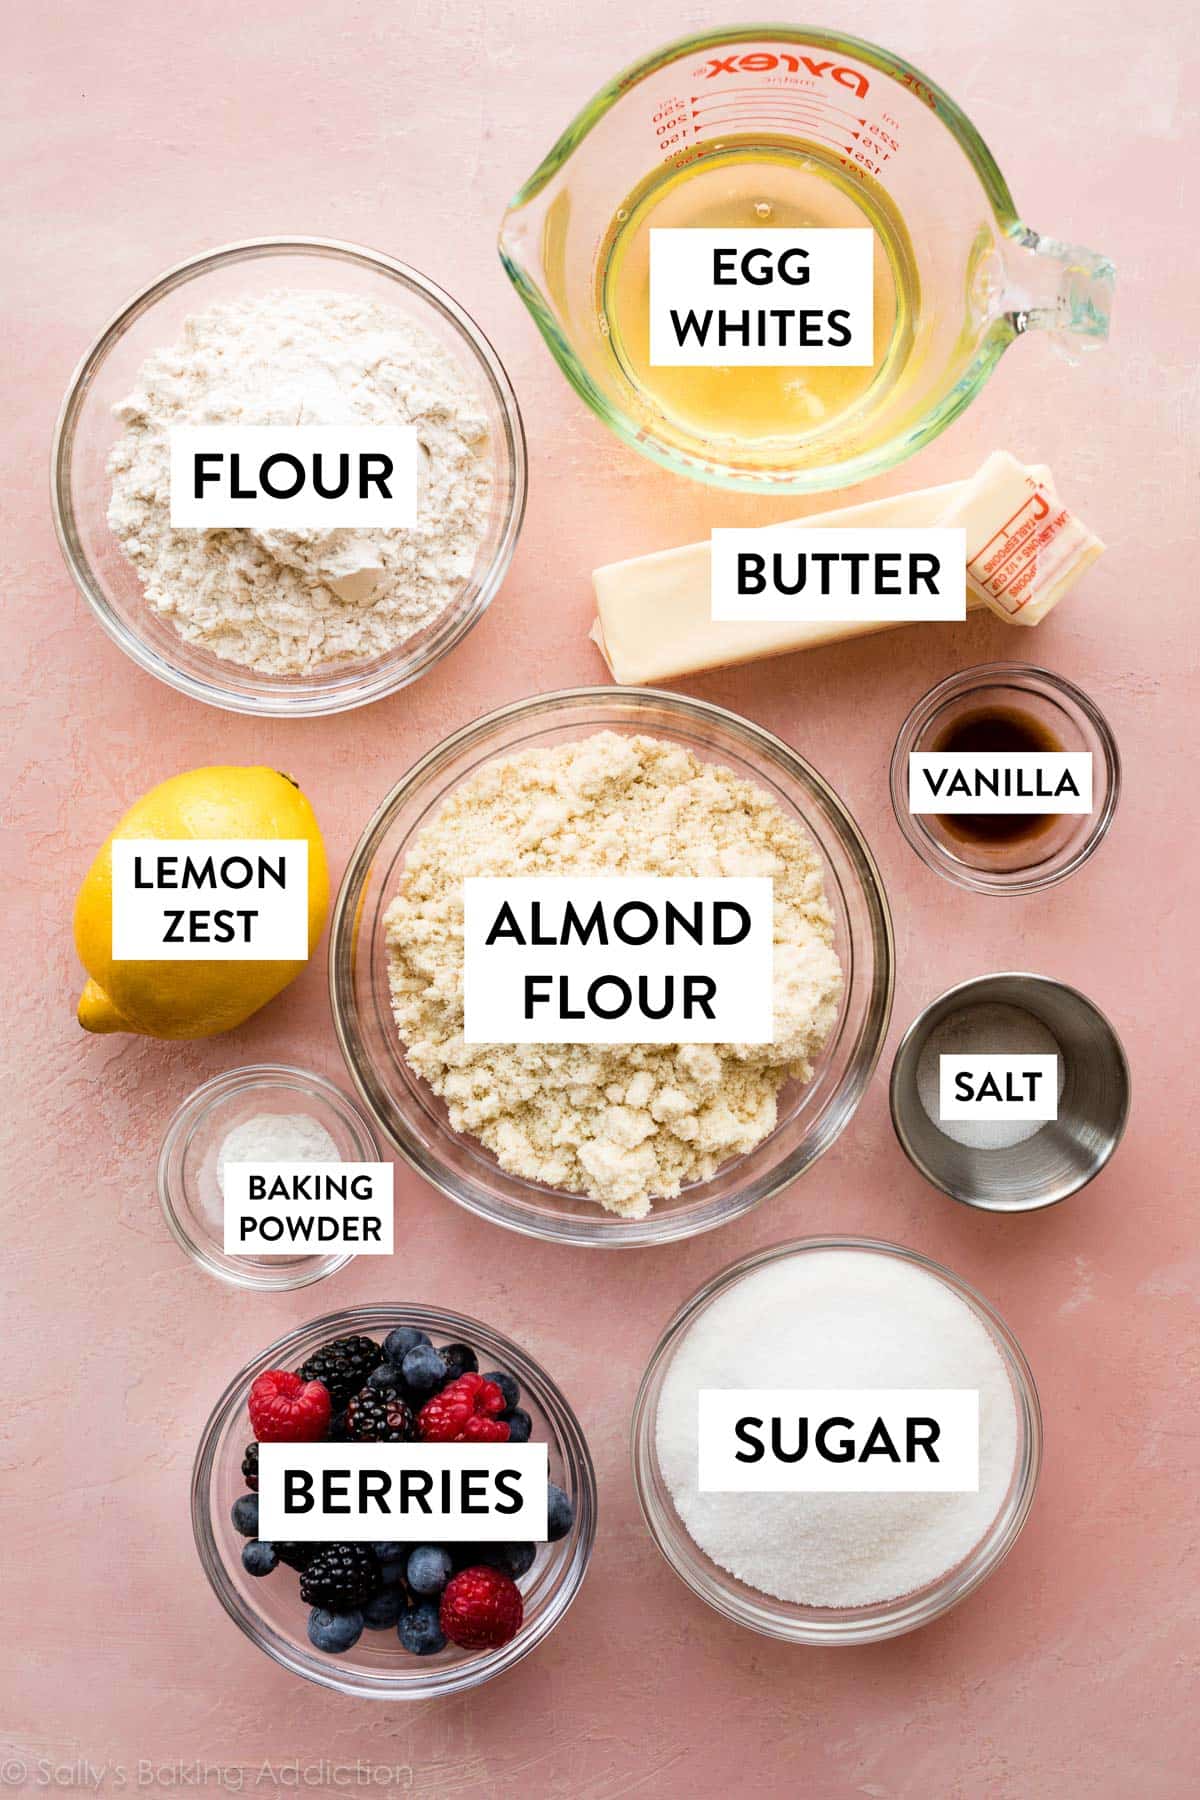 almond flour, egg whites, flour, vanilla extract, butter, and other ingredients required for this recipe